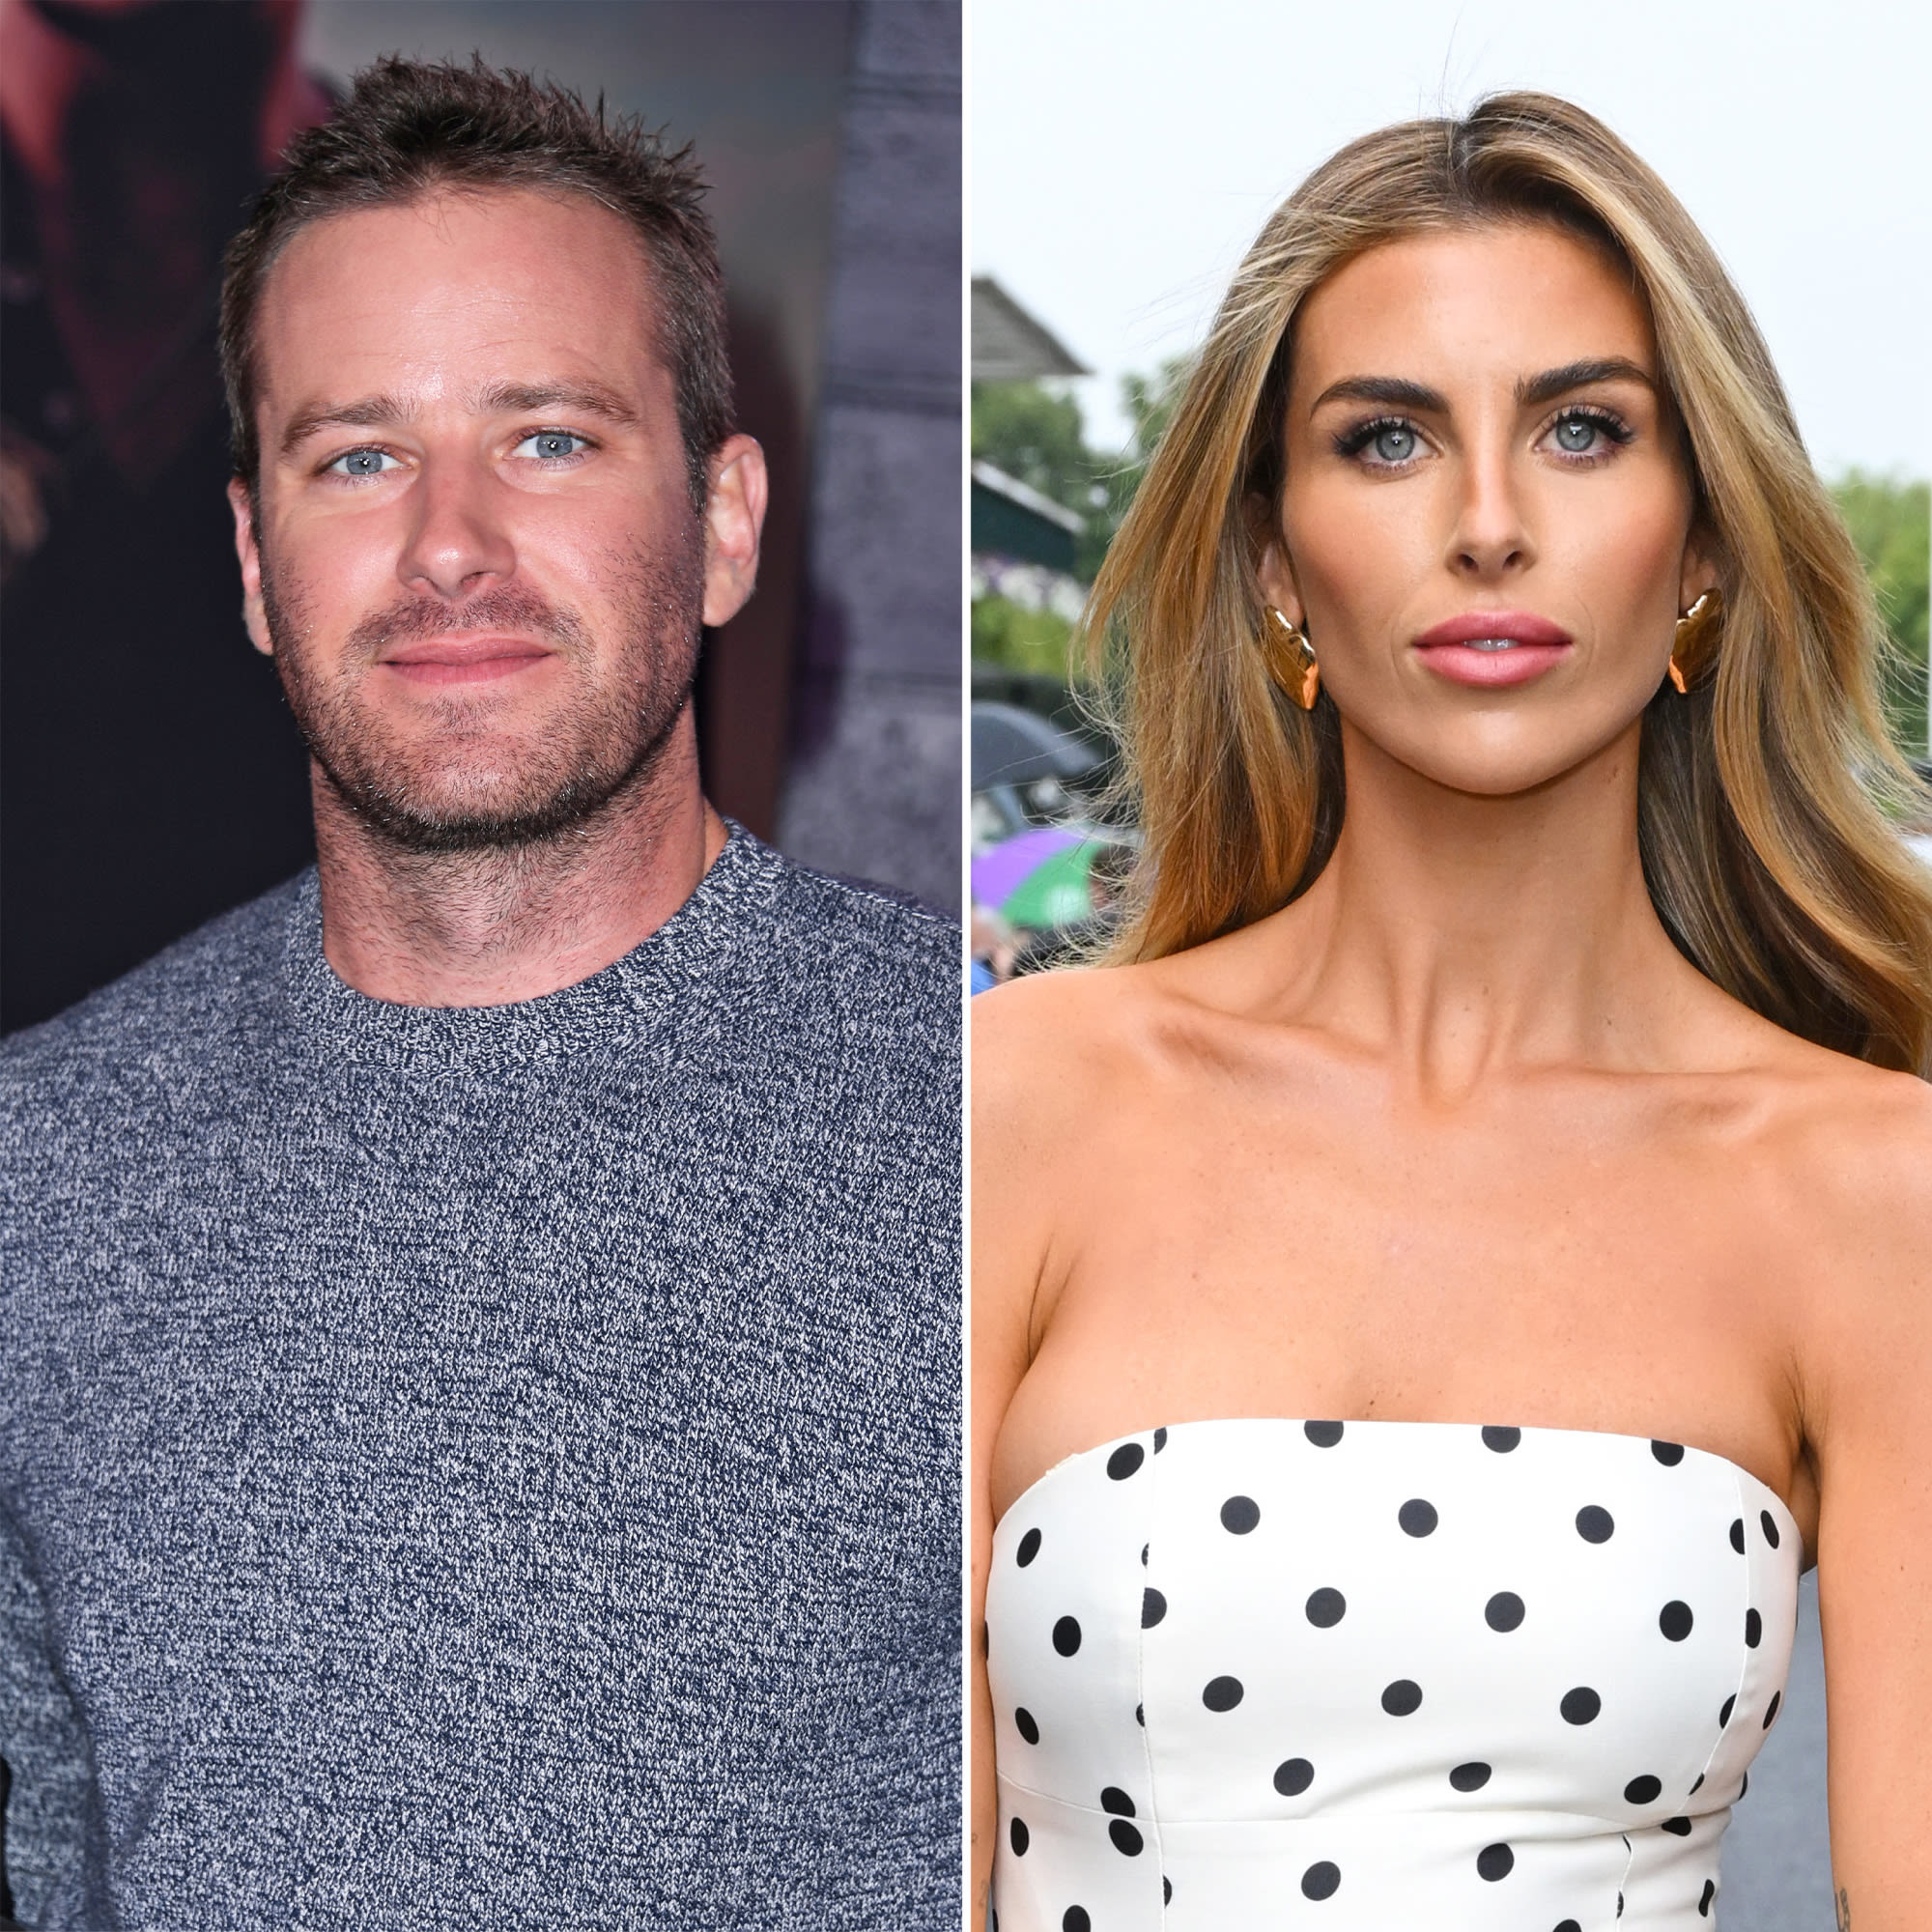 Armie Hammer Admits He Scraped His Initials Into Paige Lorenze’s Body: ‘There Wasn’t Even Blood’